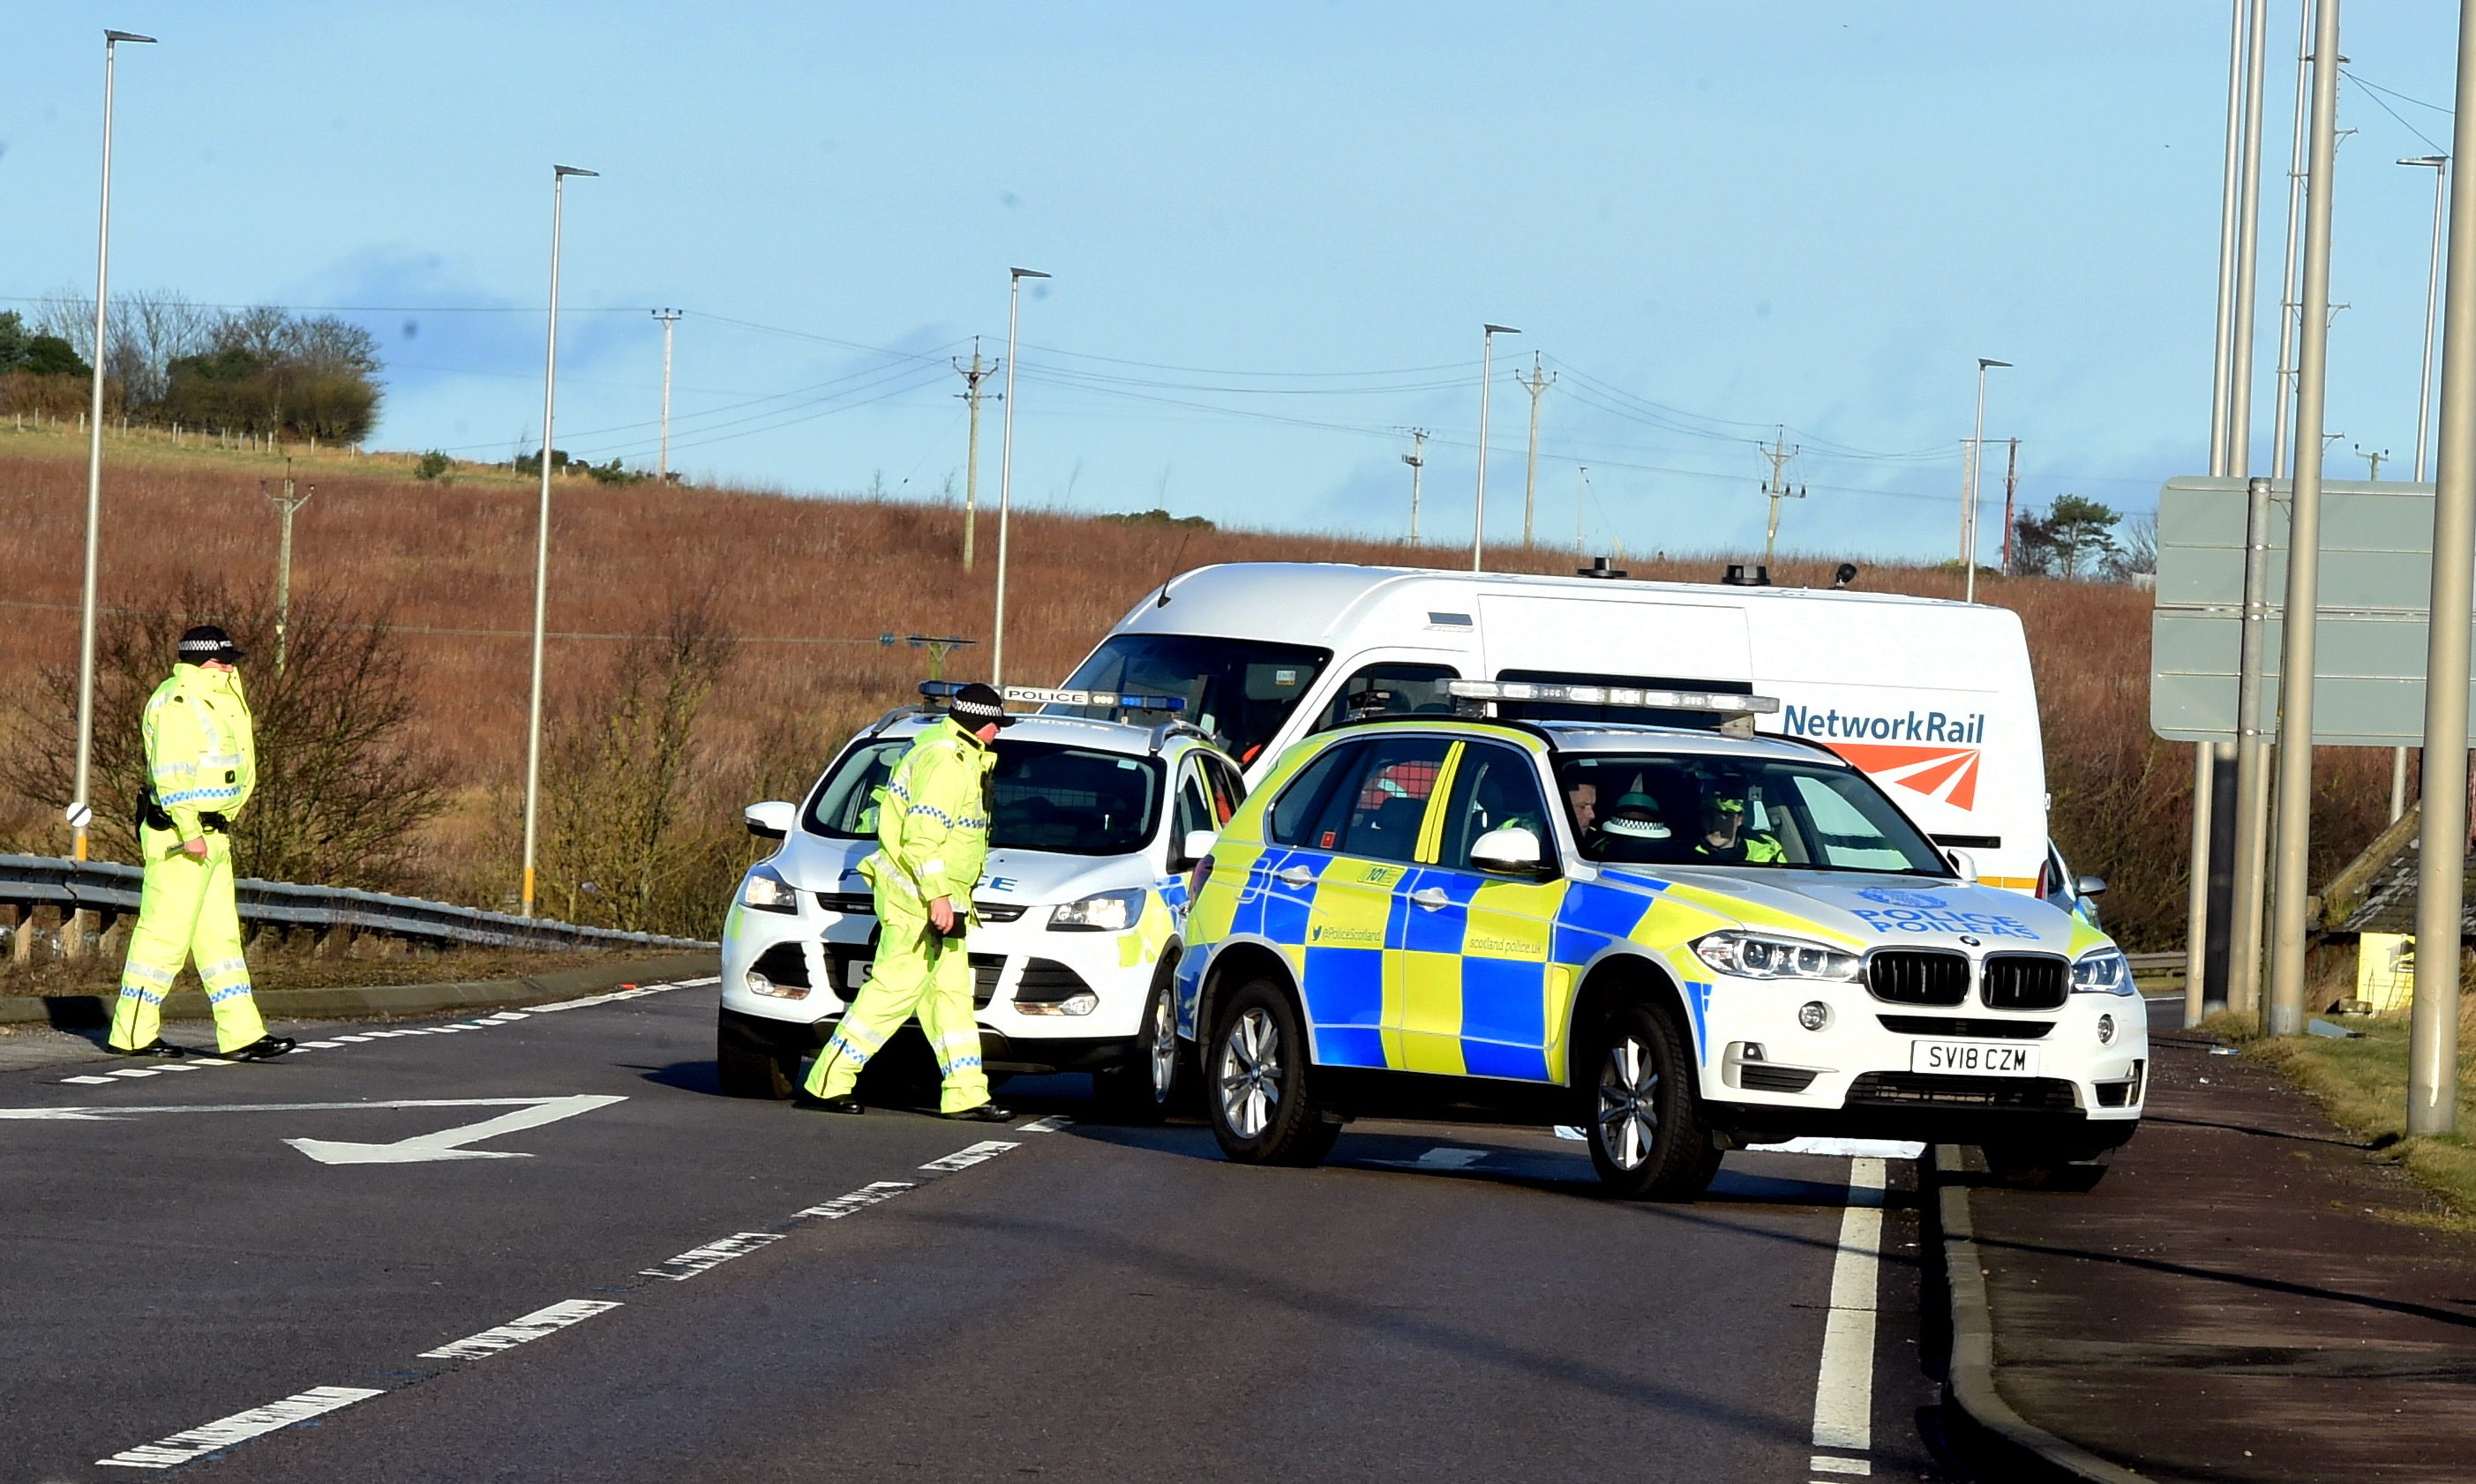 The scene of the incident on the A92.